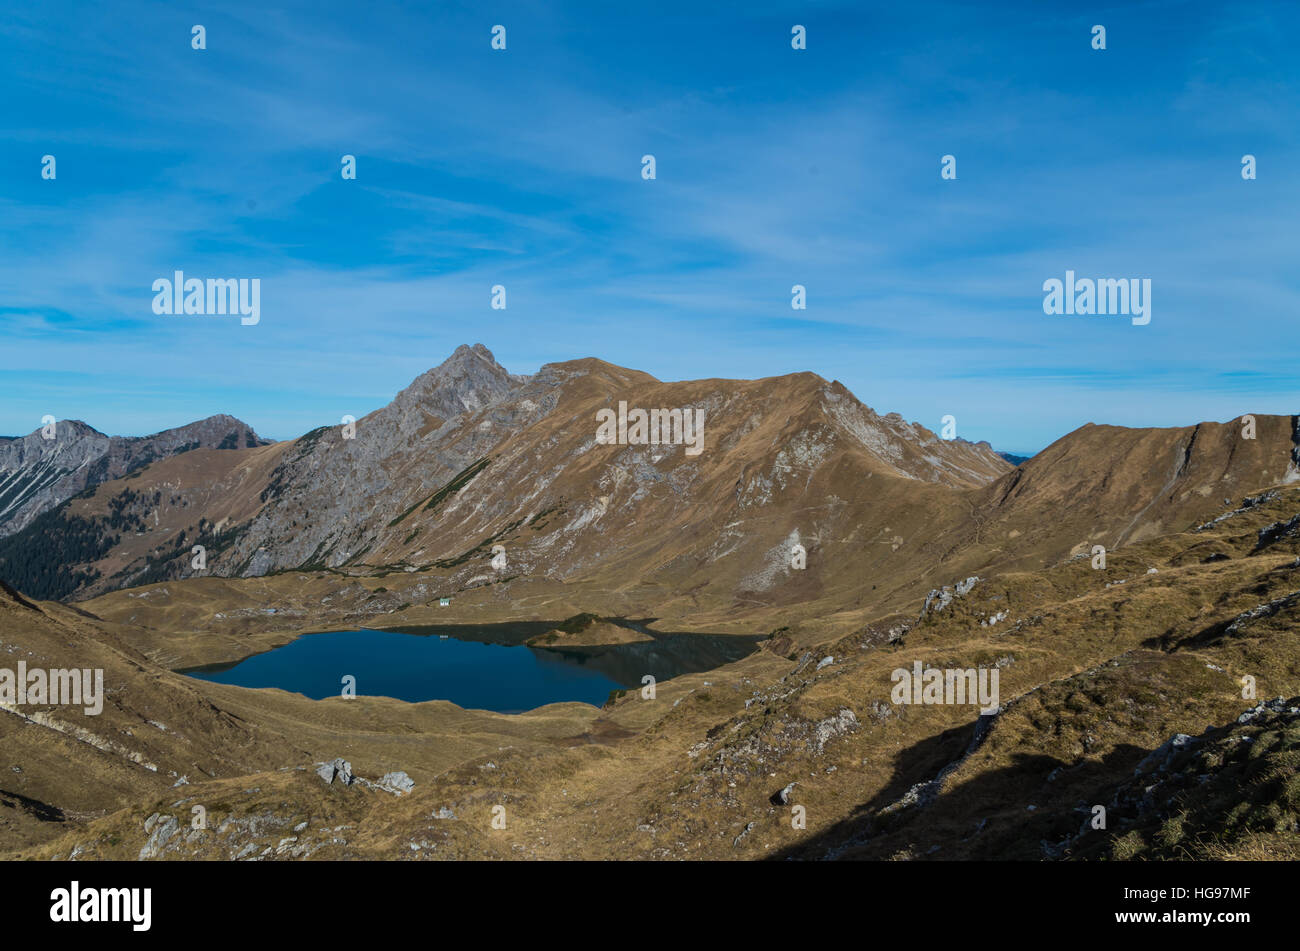 Panorma of mountain lake Schrecksee in Allgau Alps, Germany Stock Photo